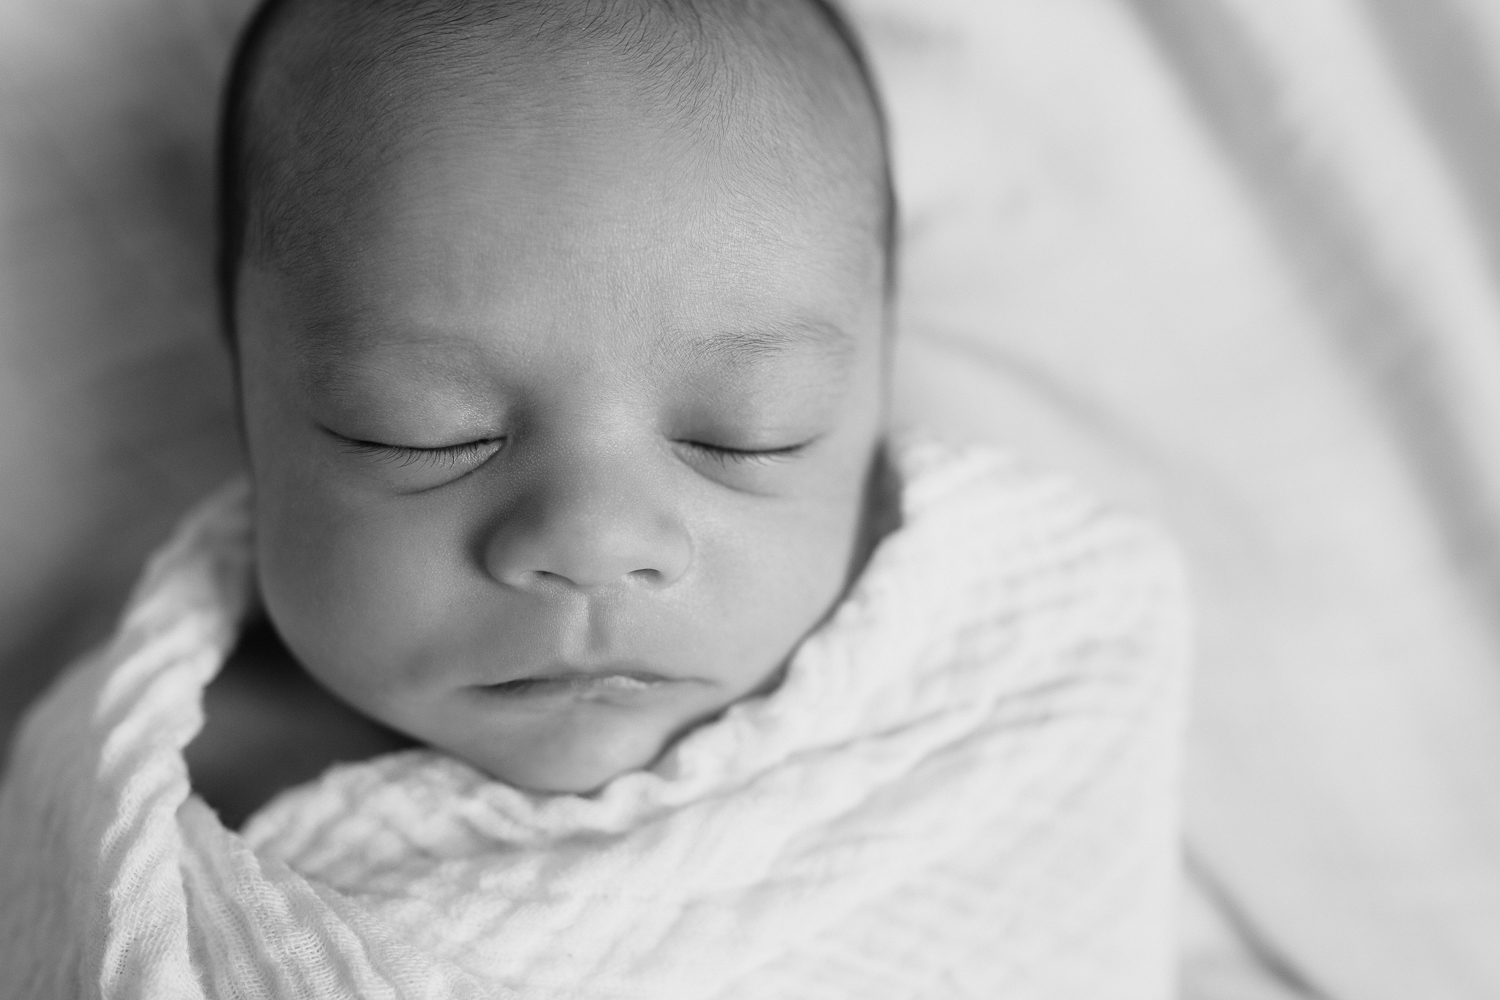 3 week old baby boy with dark hair sleeping wrapped in white swaddle, black and white portrait - Newmarket In-Home Photos